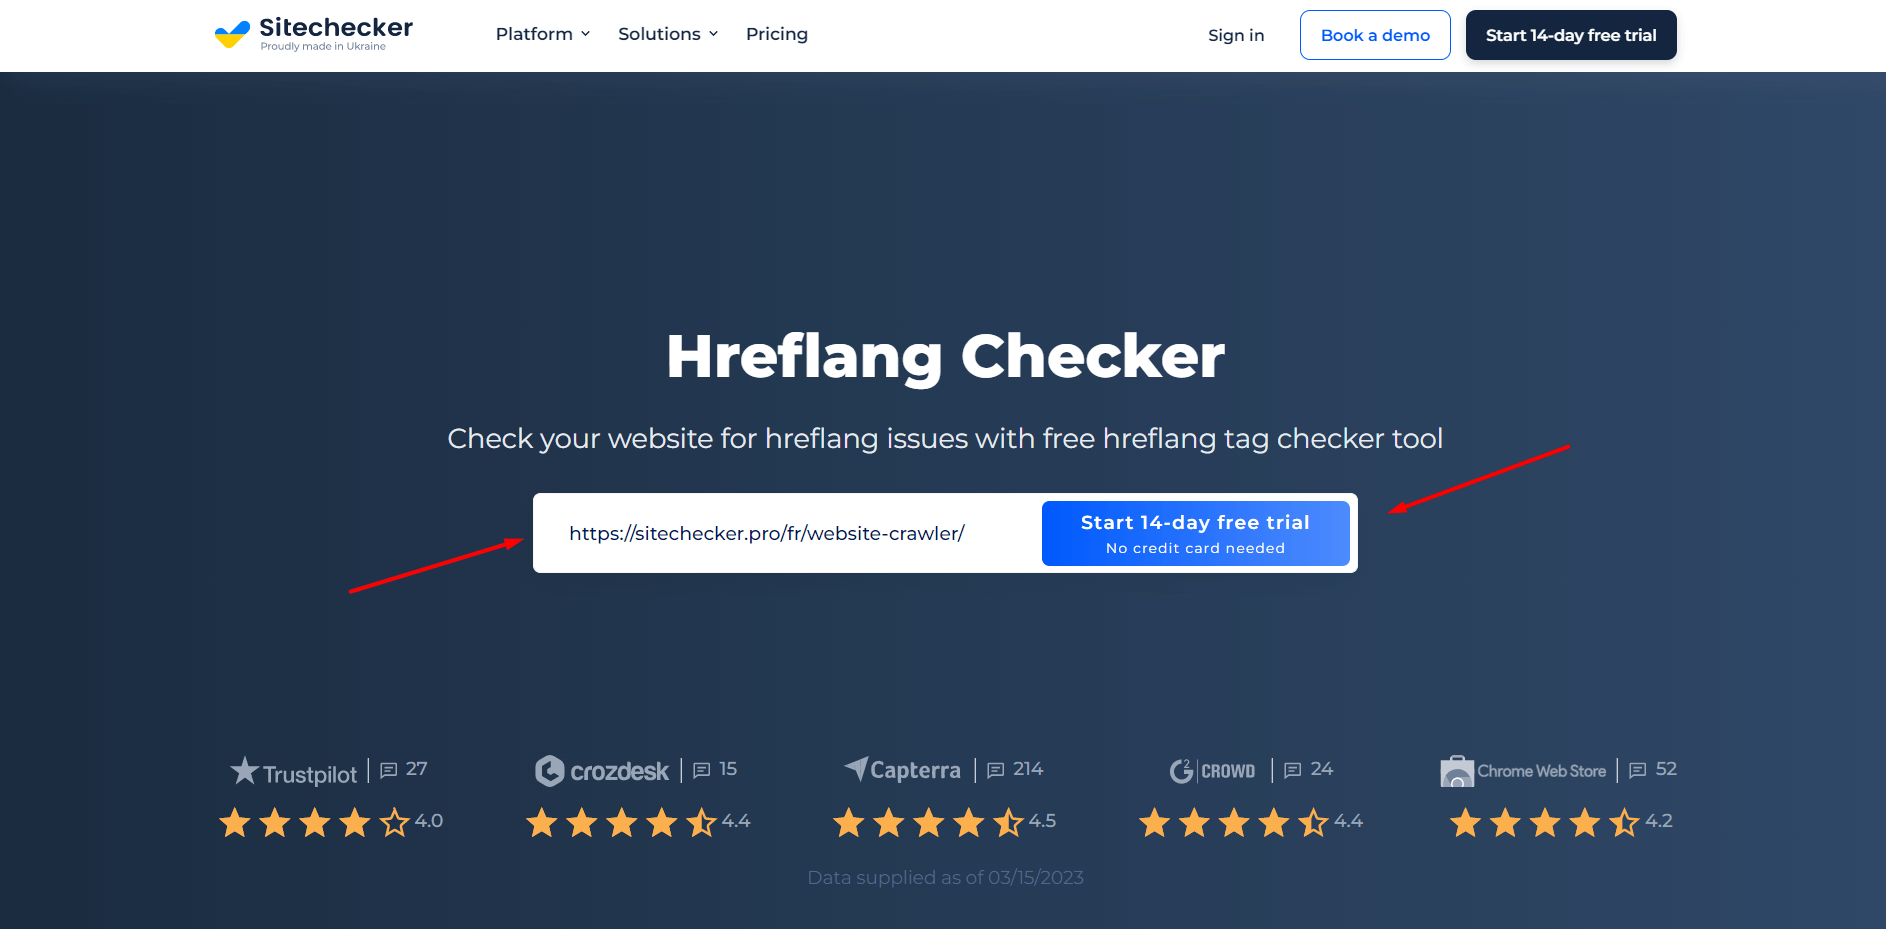 hreflang links check free trial start